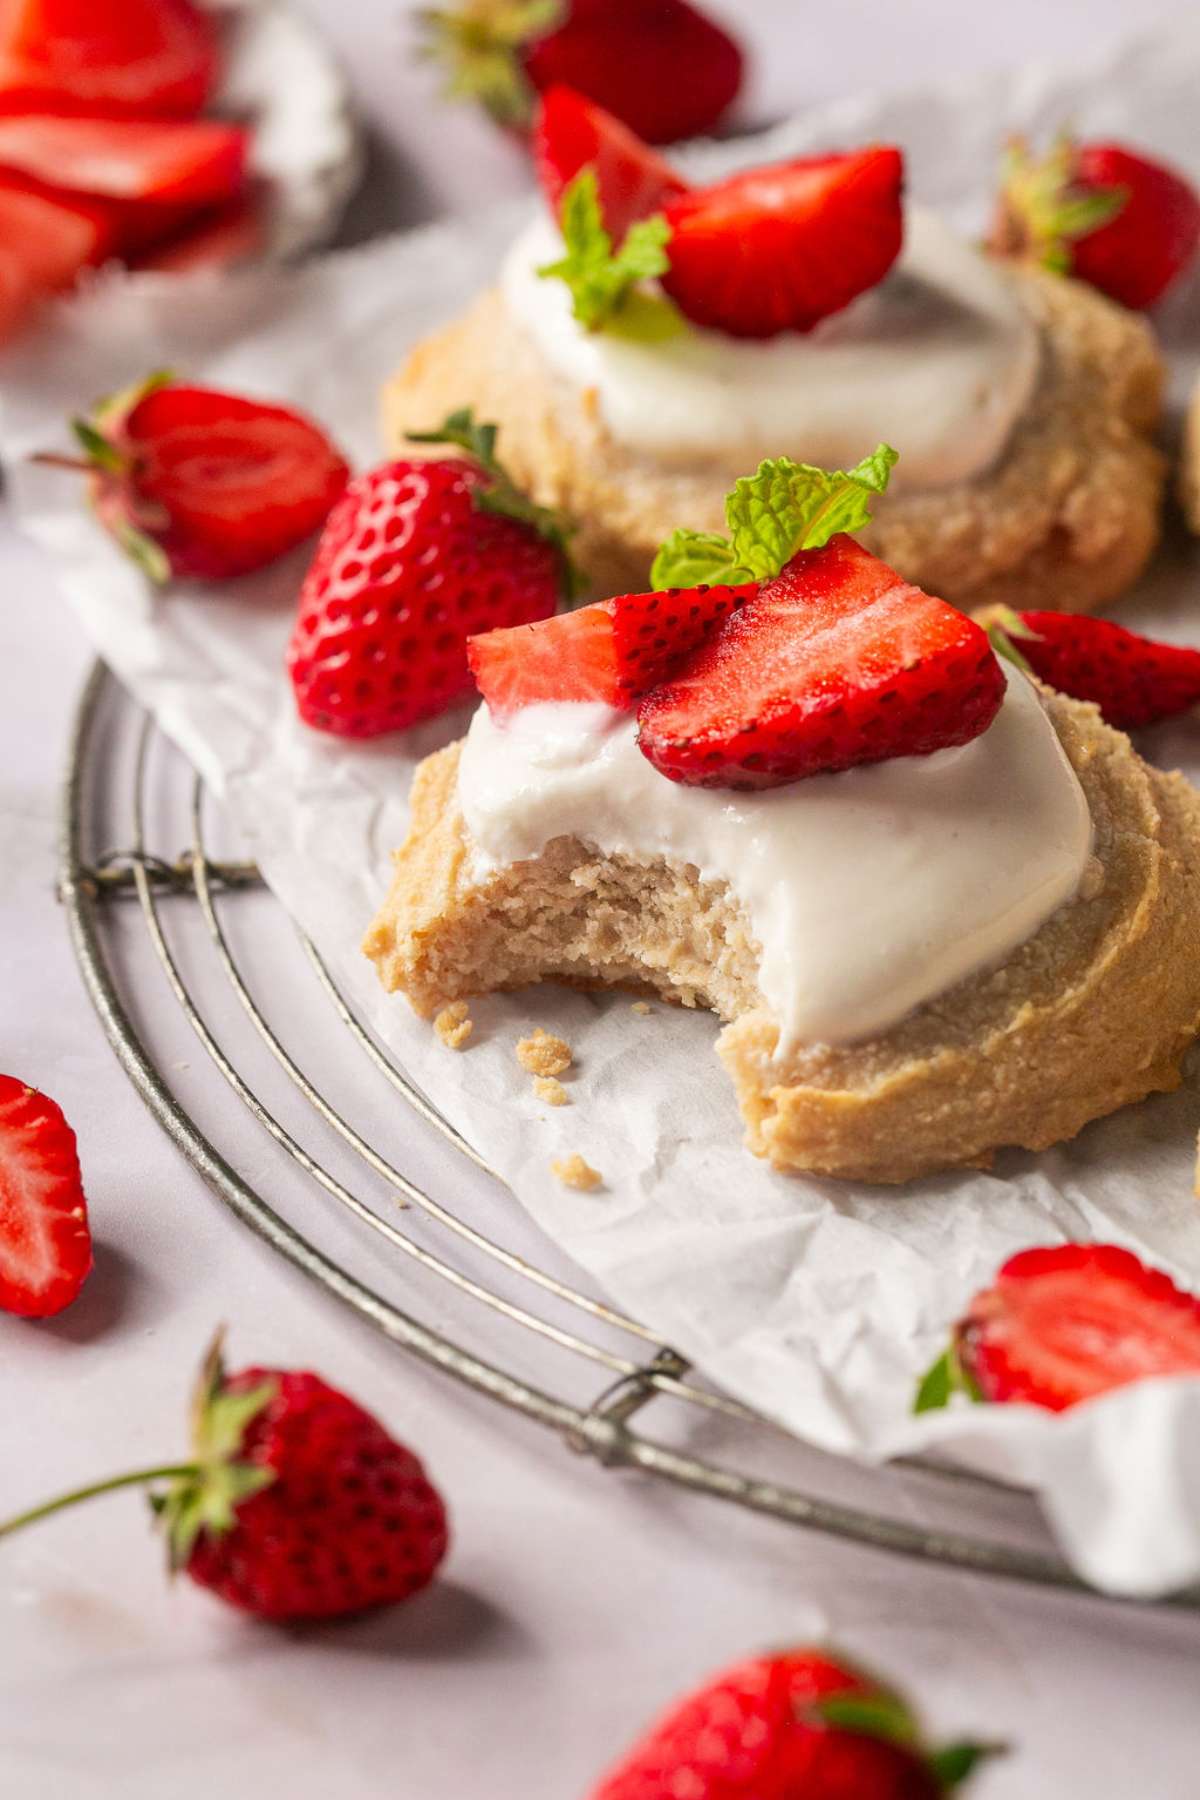 Skinny Strawberry Shortcake made nutritionally balanced with protein & oats in biscuit form for a portioned controlled dessert or snack. Perfect for those watching their weight or trying to lose weight. Gluten Free + Low Calorie 